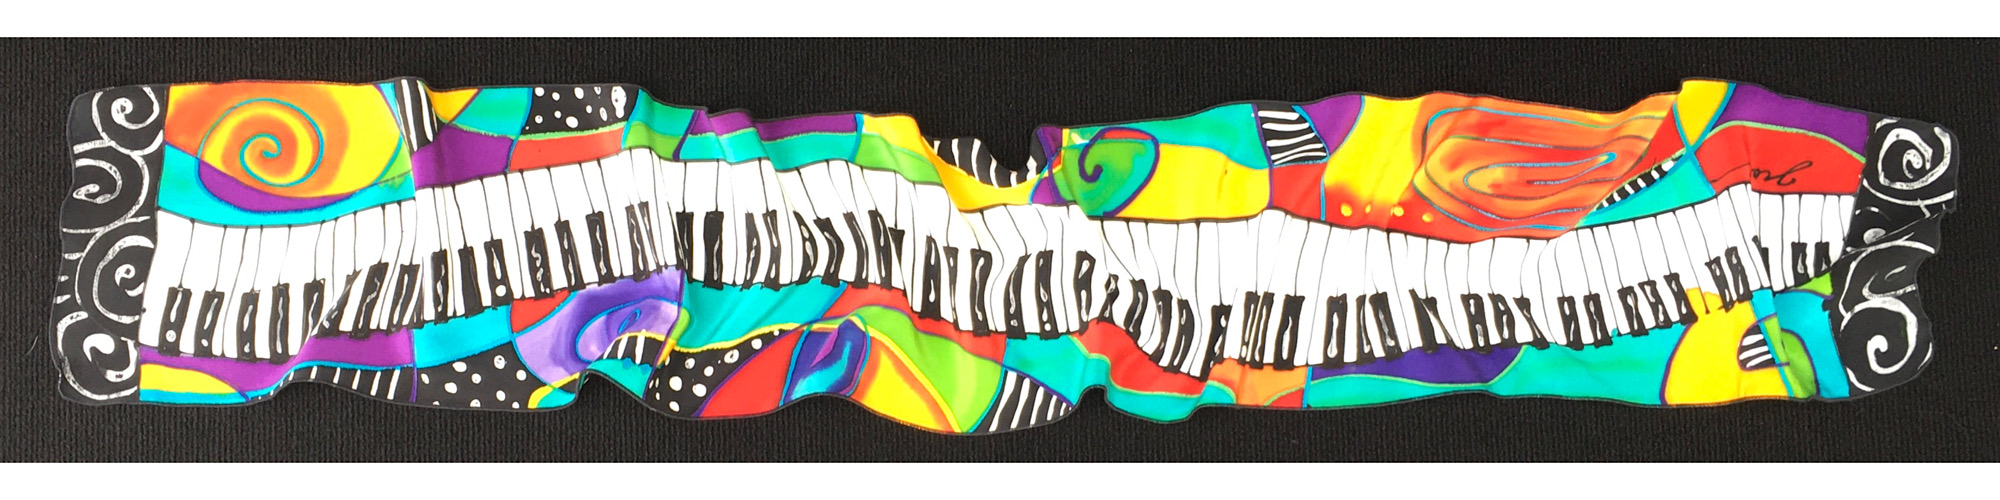 8" x 60" Musical Extravaganza scarf picture